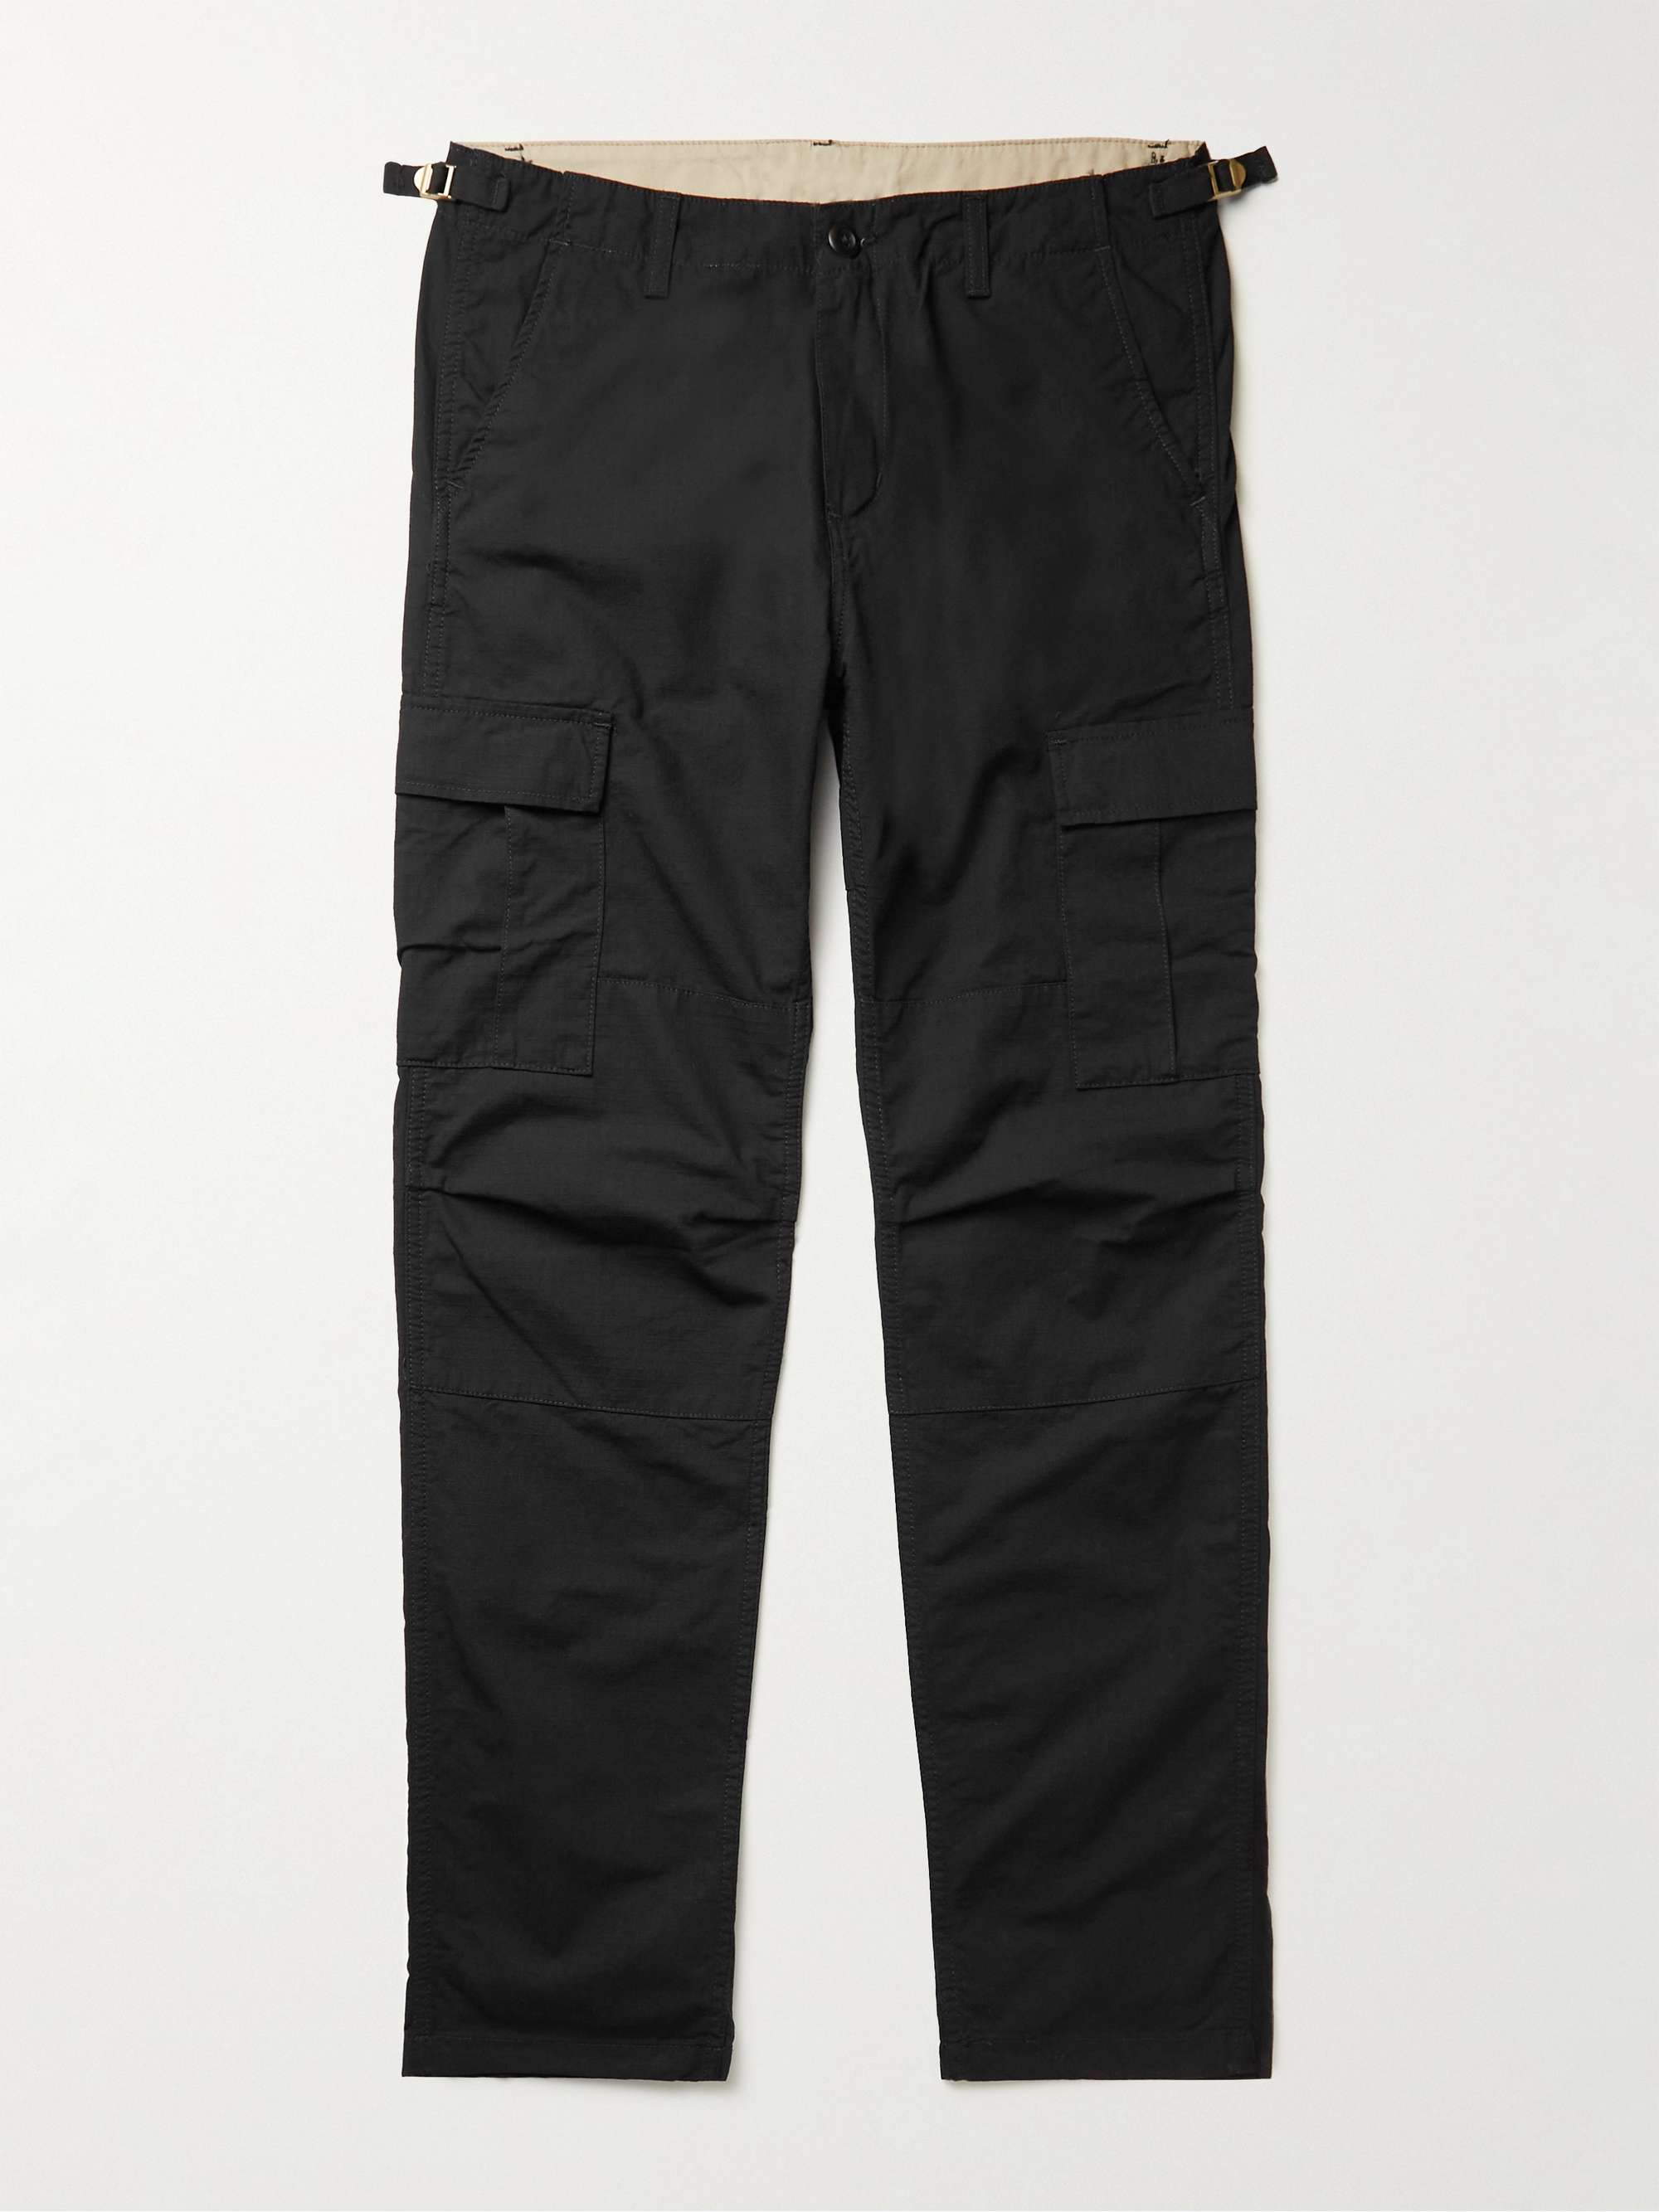 CARHARTT WIP Aviation Slim-Fit Cotton-Ripstop Cargo Trousers | MR PORTER